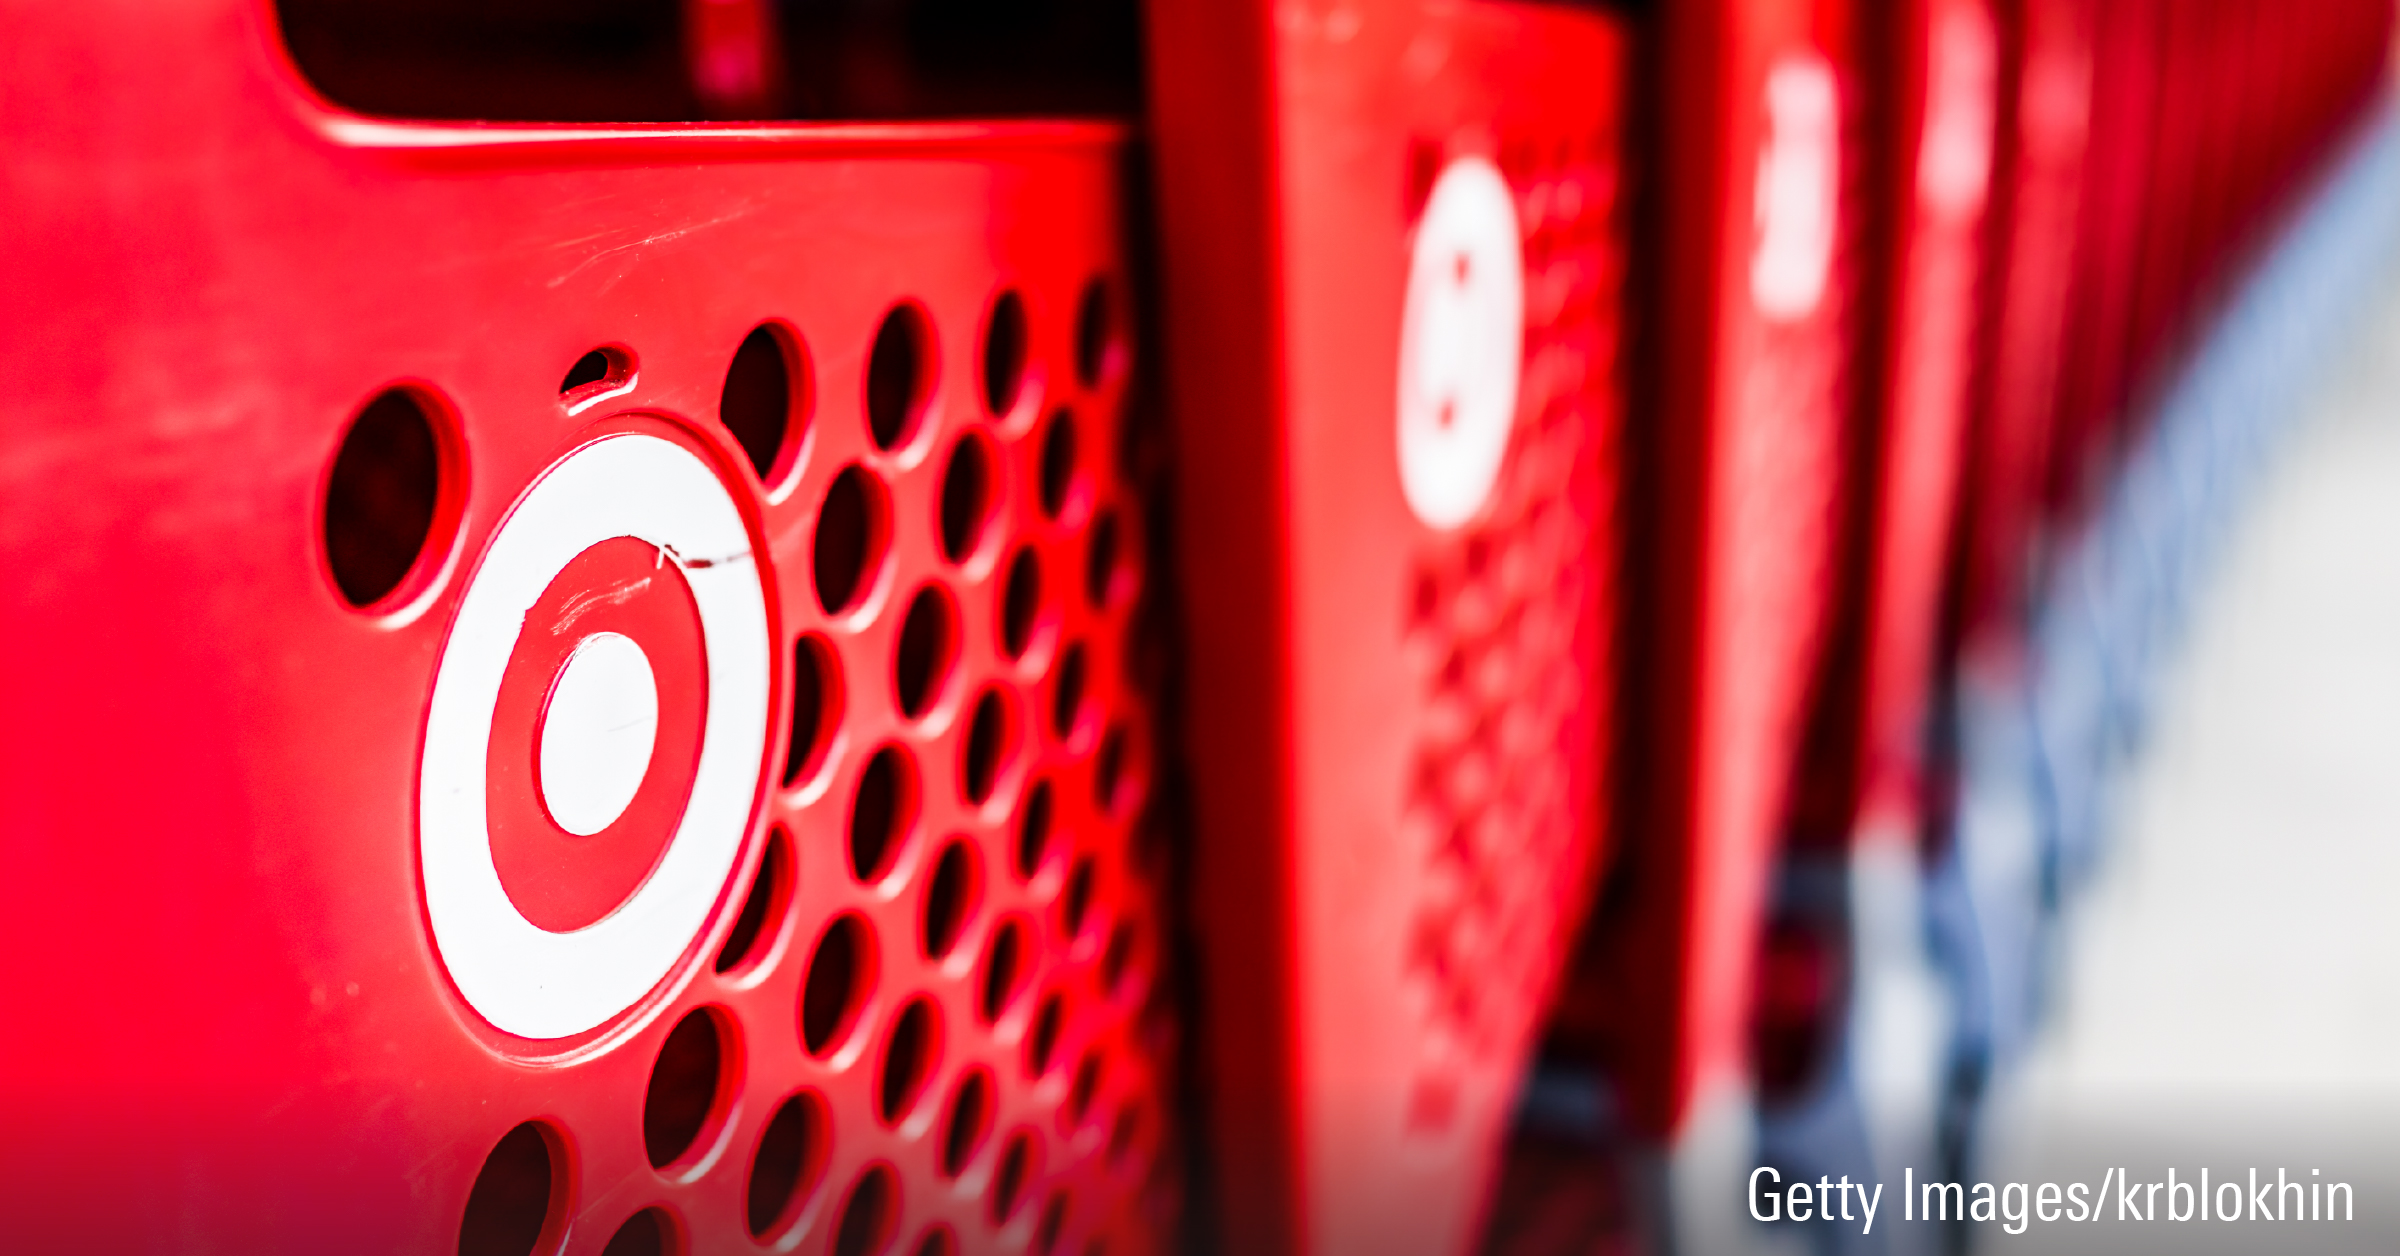 A row of shopping carts with the Target store logo are shown stacked together.